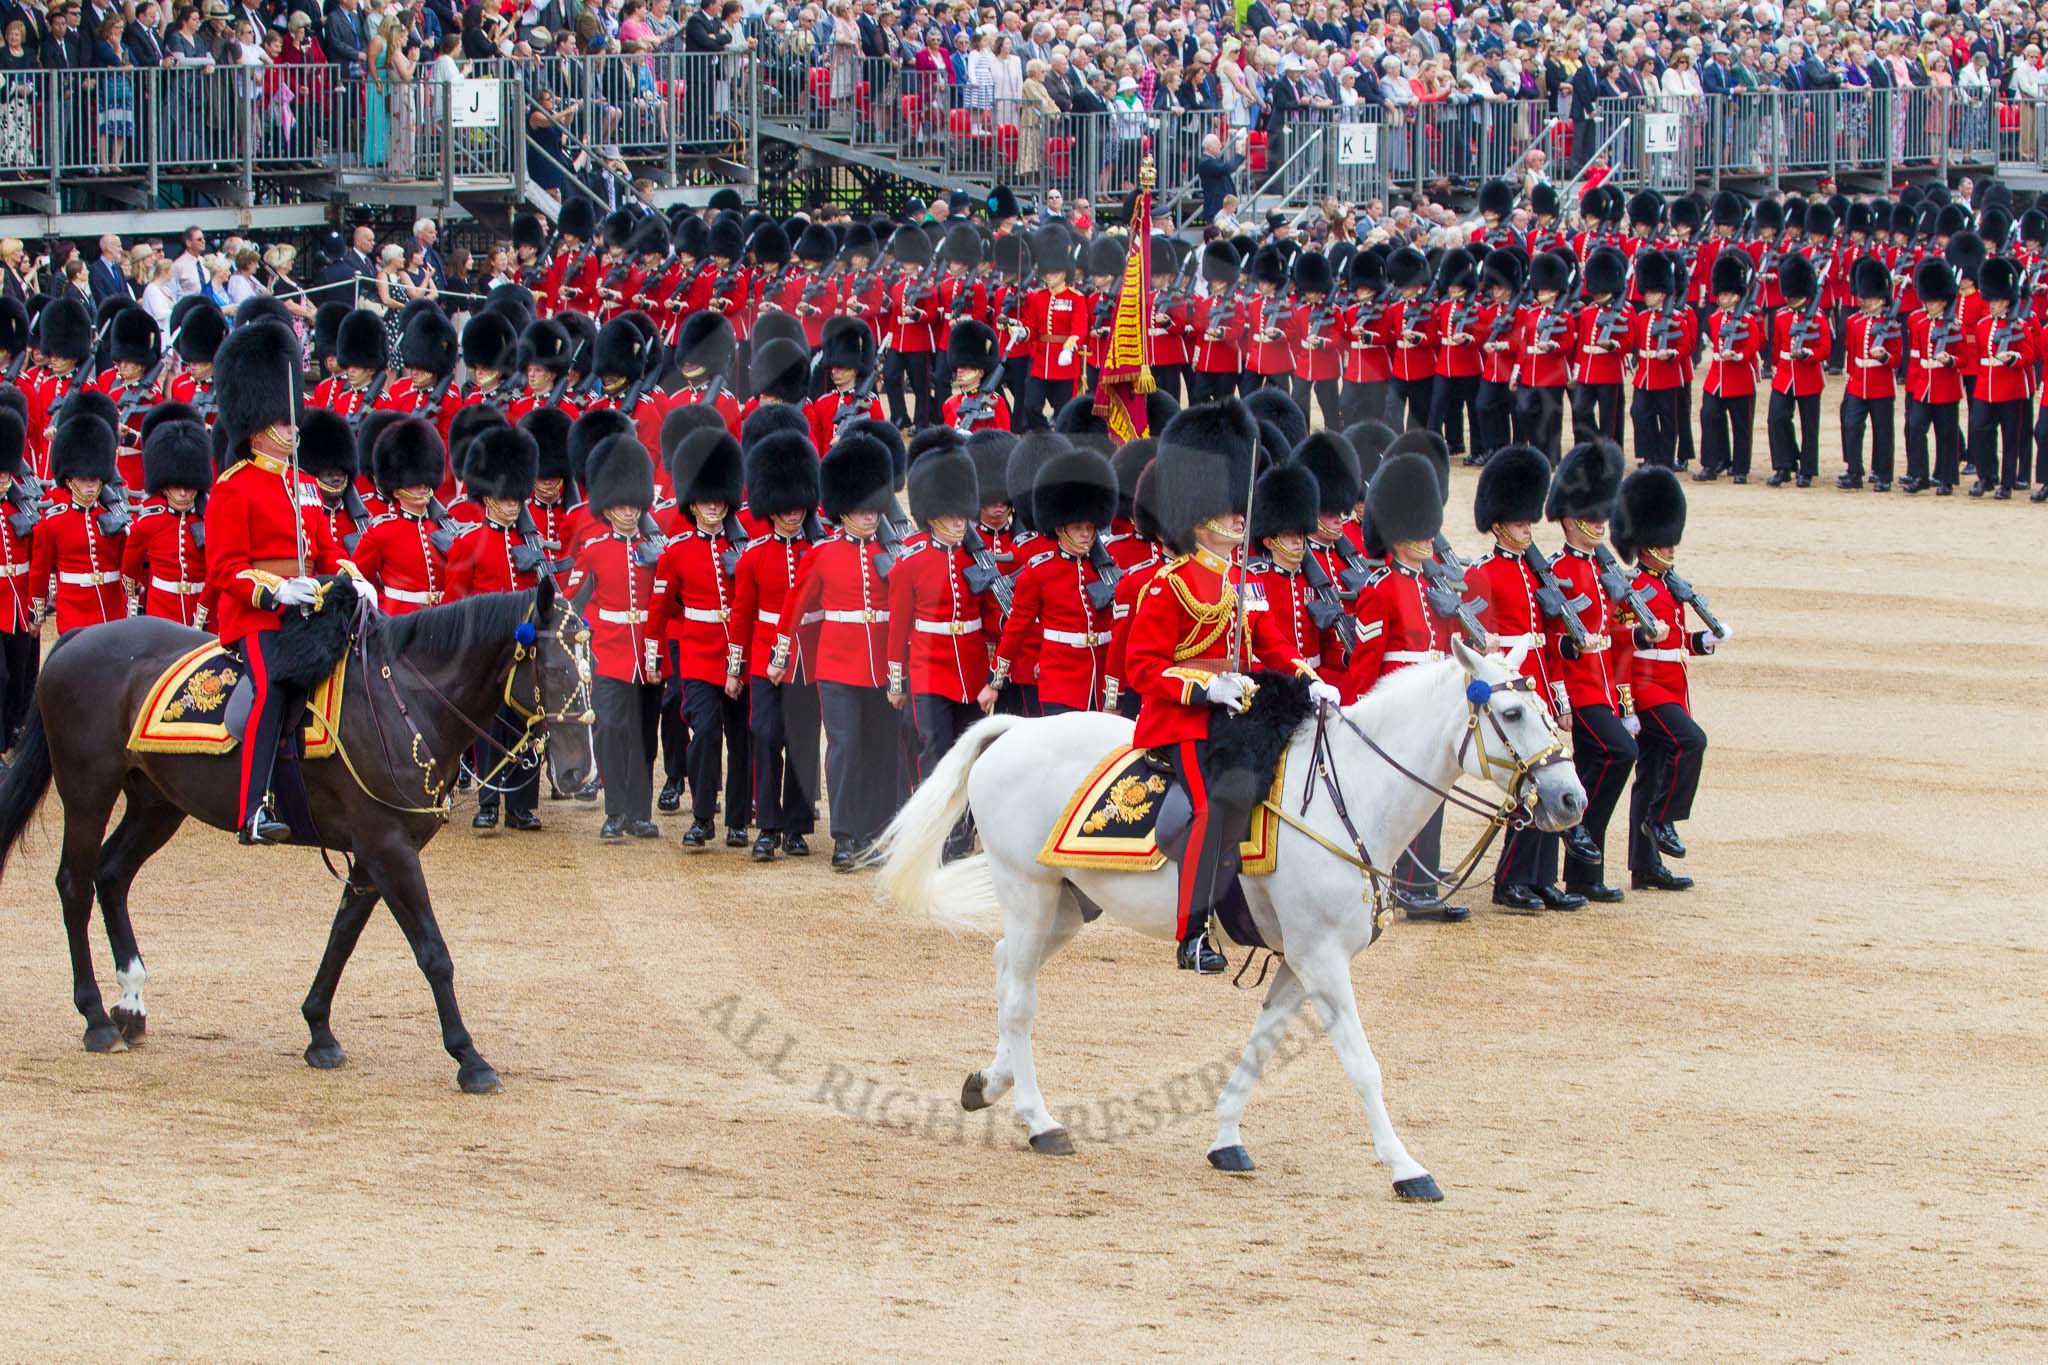 Trooping the Colour 2014.
Horse Guards Parade, Westminster,
London SW1A,

United Kingdom,
on 14 June 2014 at 11:46, image #682